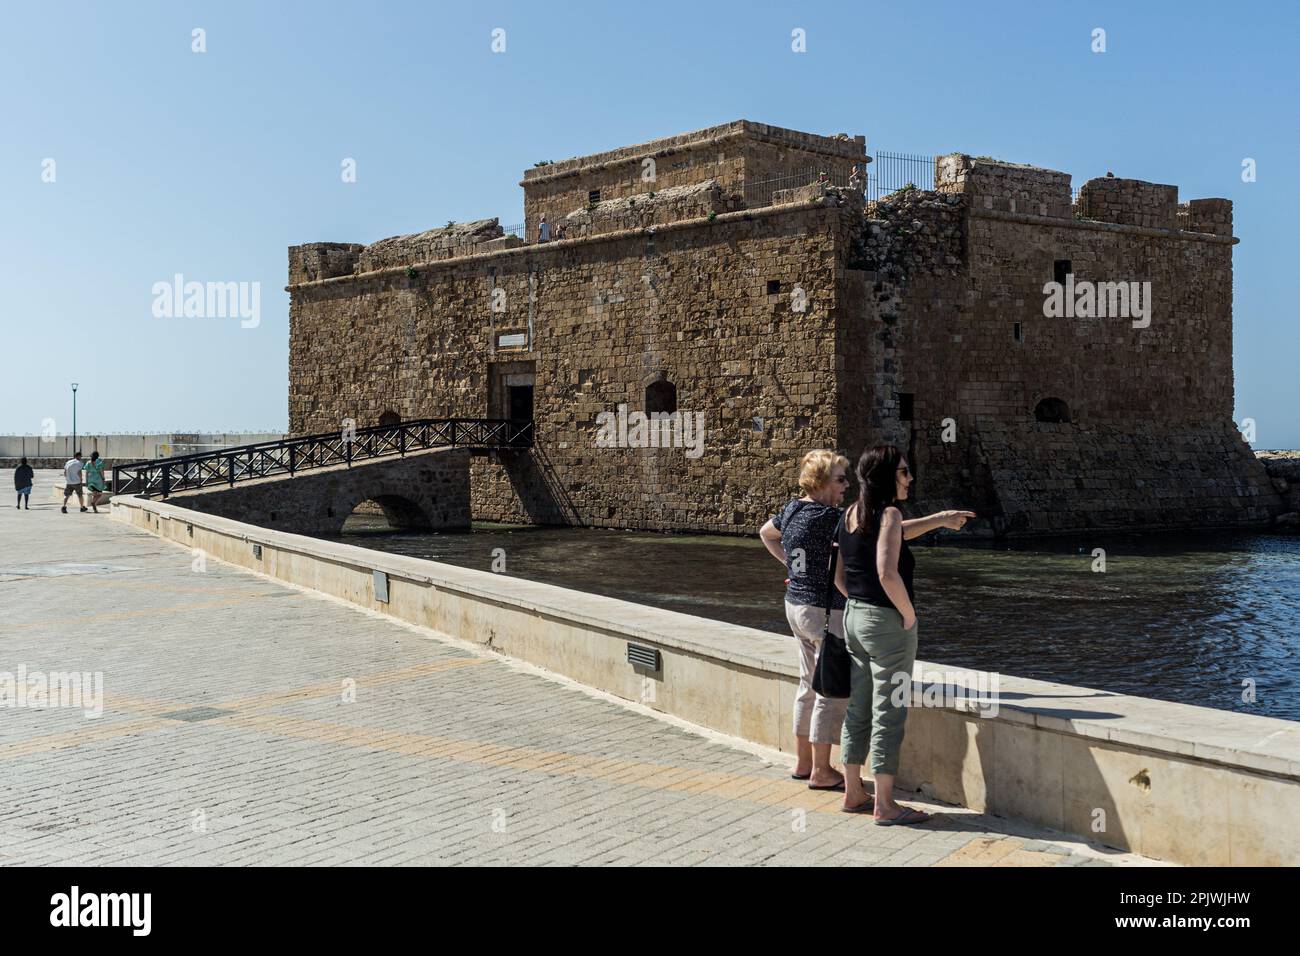 April 4, 2023, Paphos, Paphos, Cyprus: Tourists are seen in front of the castle at the port of Paphos. Cyprus sees massive increase in tourist arrivals in February with UK topping the list. Tourist arrivals in Cyprus increased by 65.6% year-on-year in February 2023. This fact, combined with the facts that Cyprus welcomed 3.2 million tourists last year, despite the absence of 800,000 Russian and Ukrainian tourists because of the war and that for 2022 it is estimated that tourists' spending has increased by about 13% on average for each trip, makes 2023 seem very promising. (Credit Image: © Kost Stock Photo